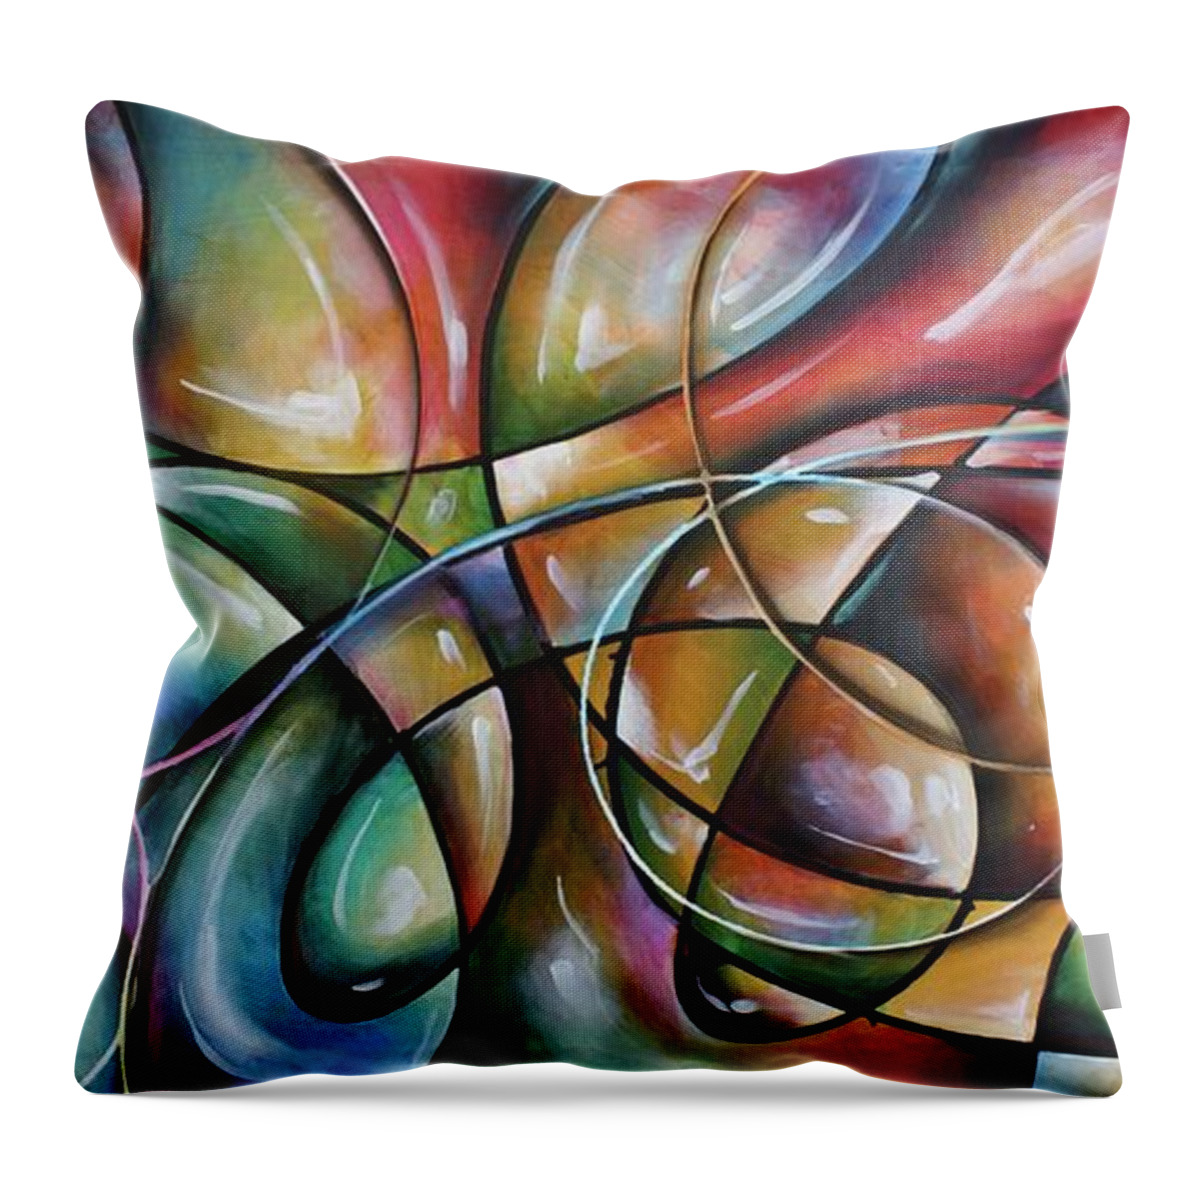 Soft Textured Throw Pillow featuring the painting Maxcap by Michael Lang